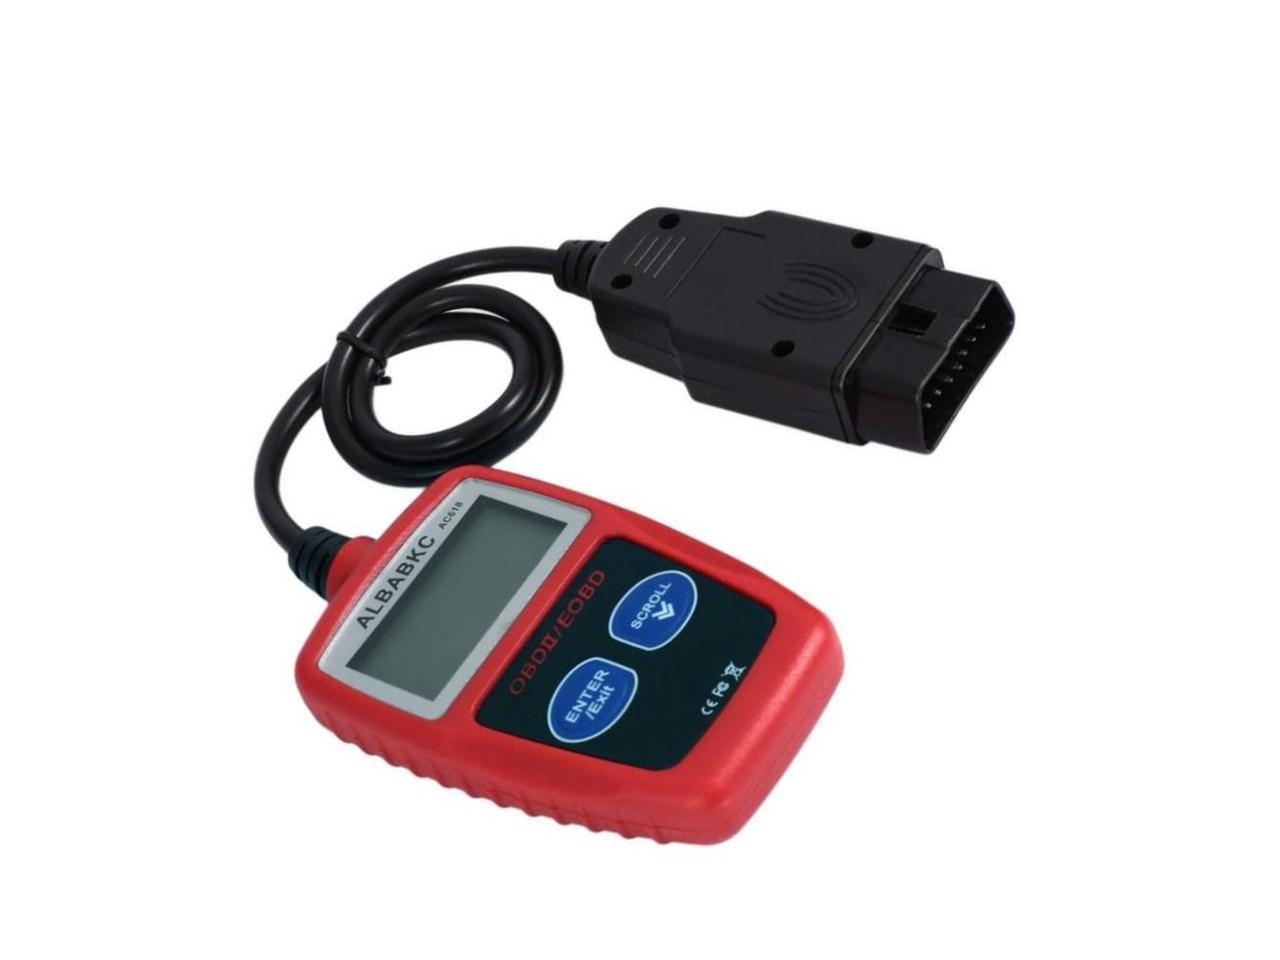 Durable OBDII Car Vehicle Diagnostic Scan Tool Fault Code Reader AC618 